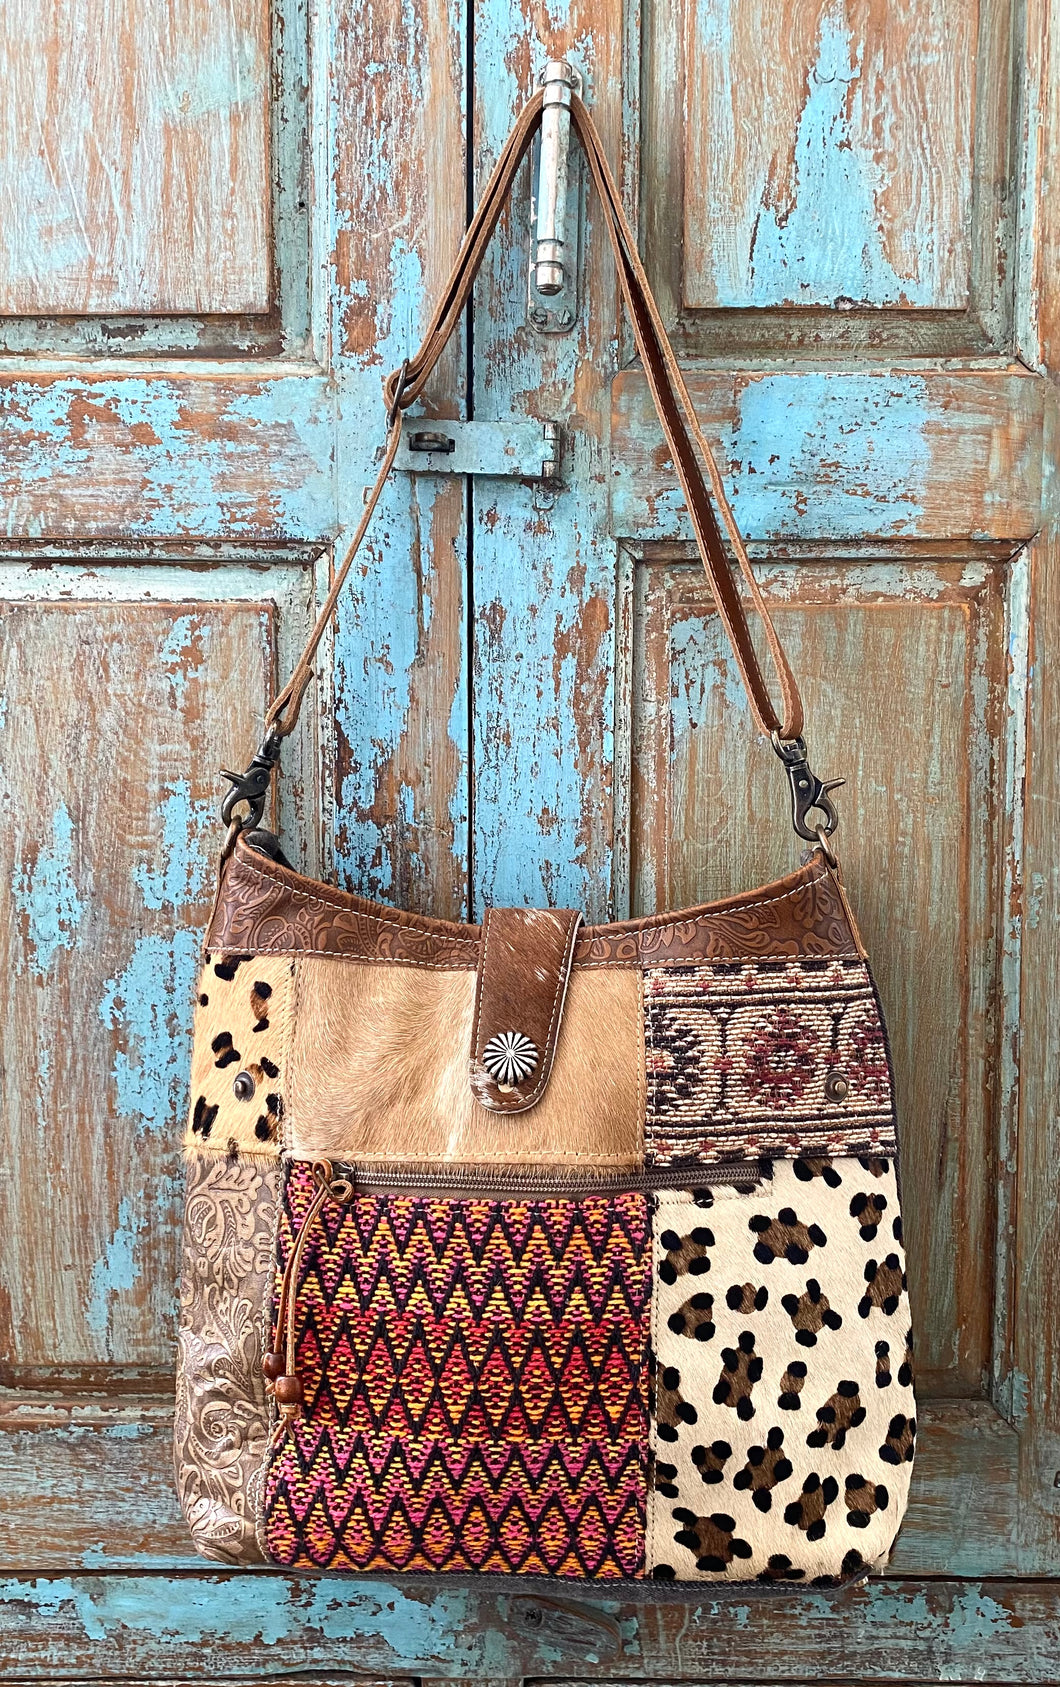 Up-Cycled Canvas, Genuine Leather, & Natural Hair-On Shoulder Bag/Cross-body Bag